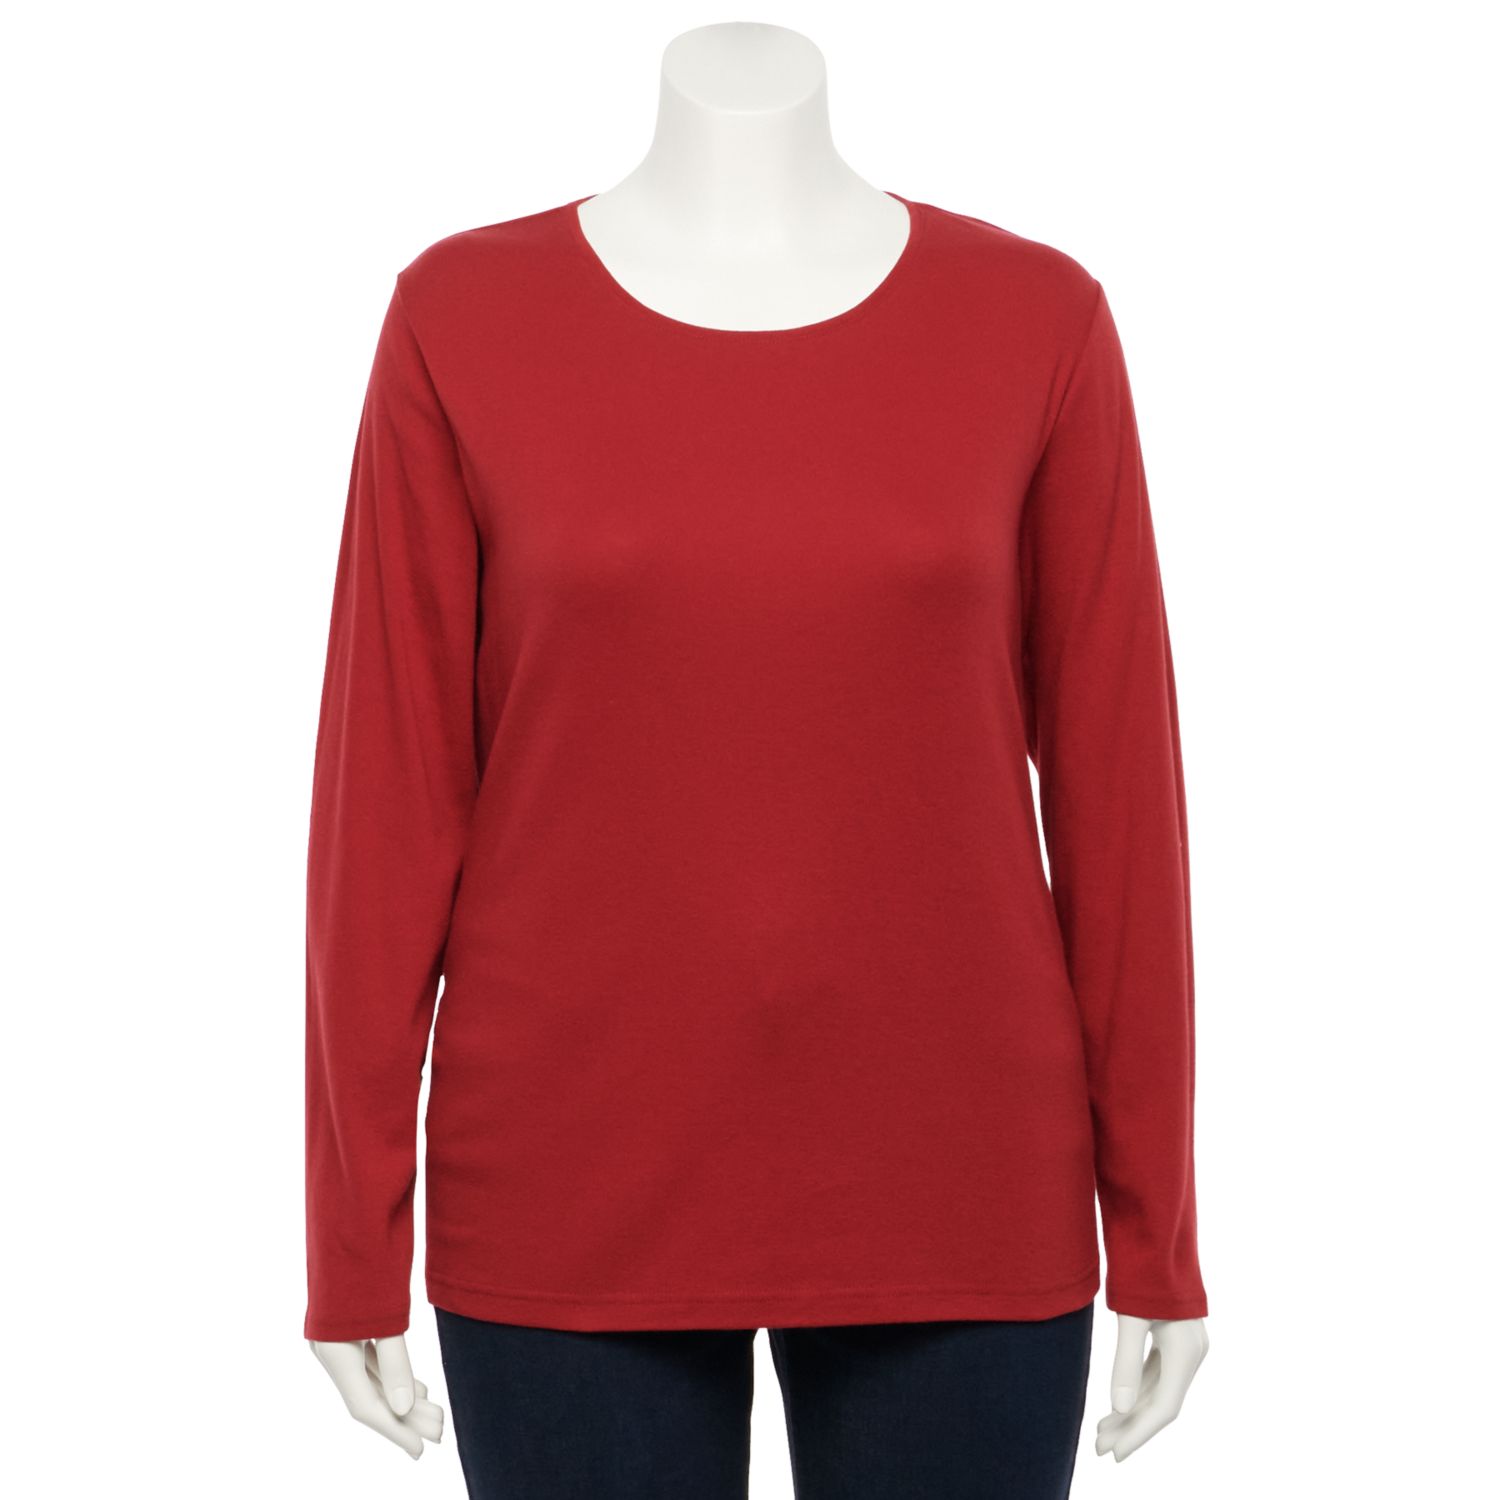 red and black plus size tops